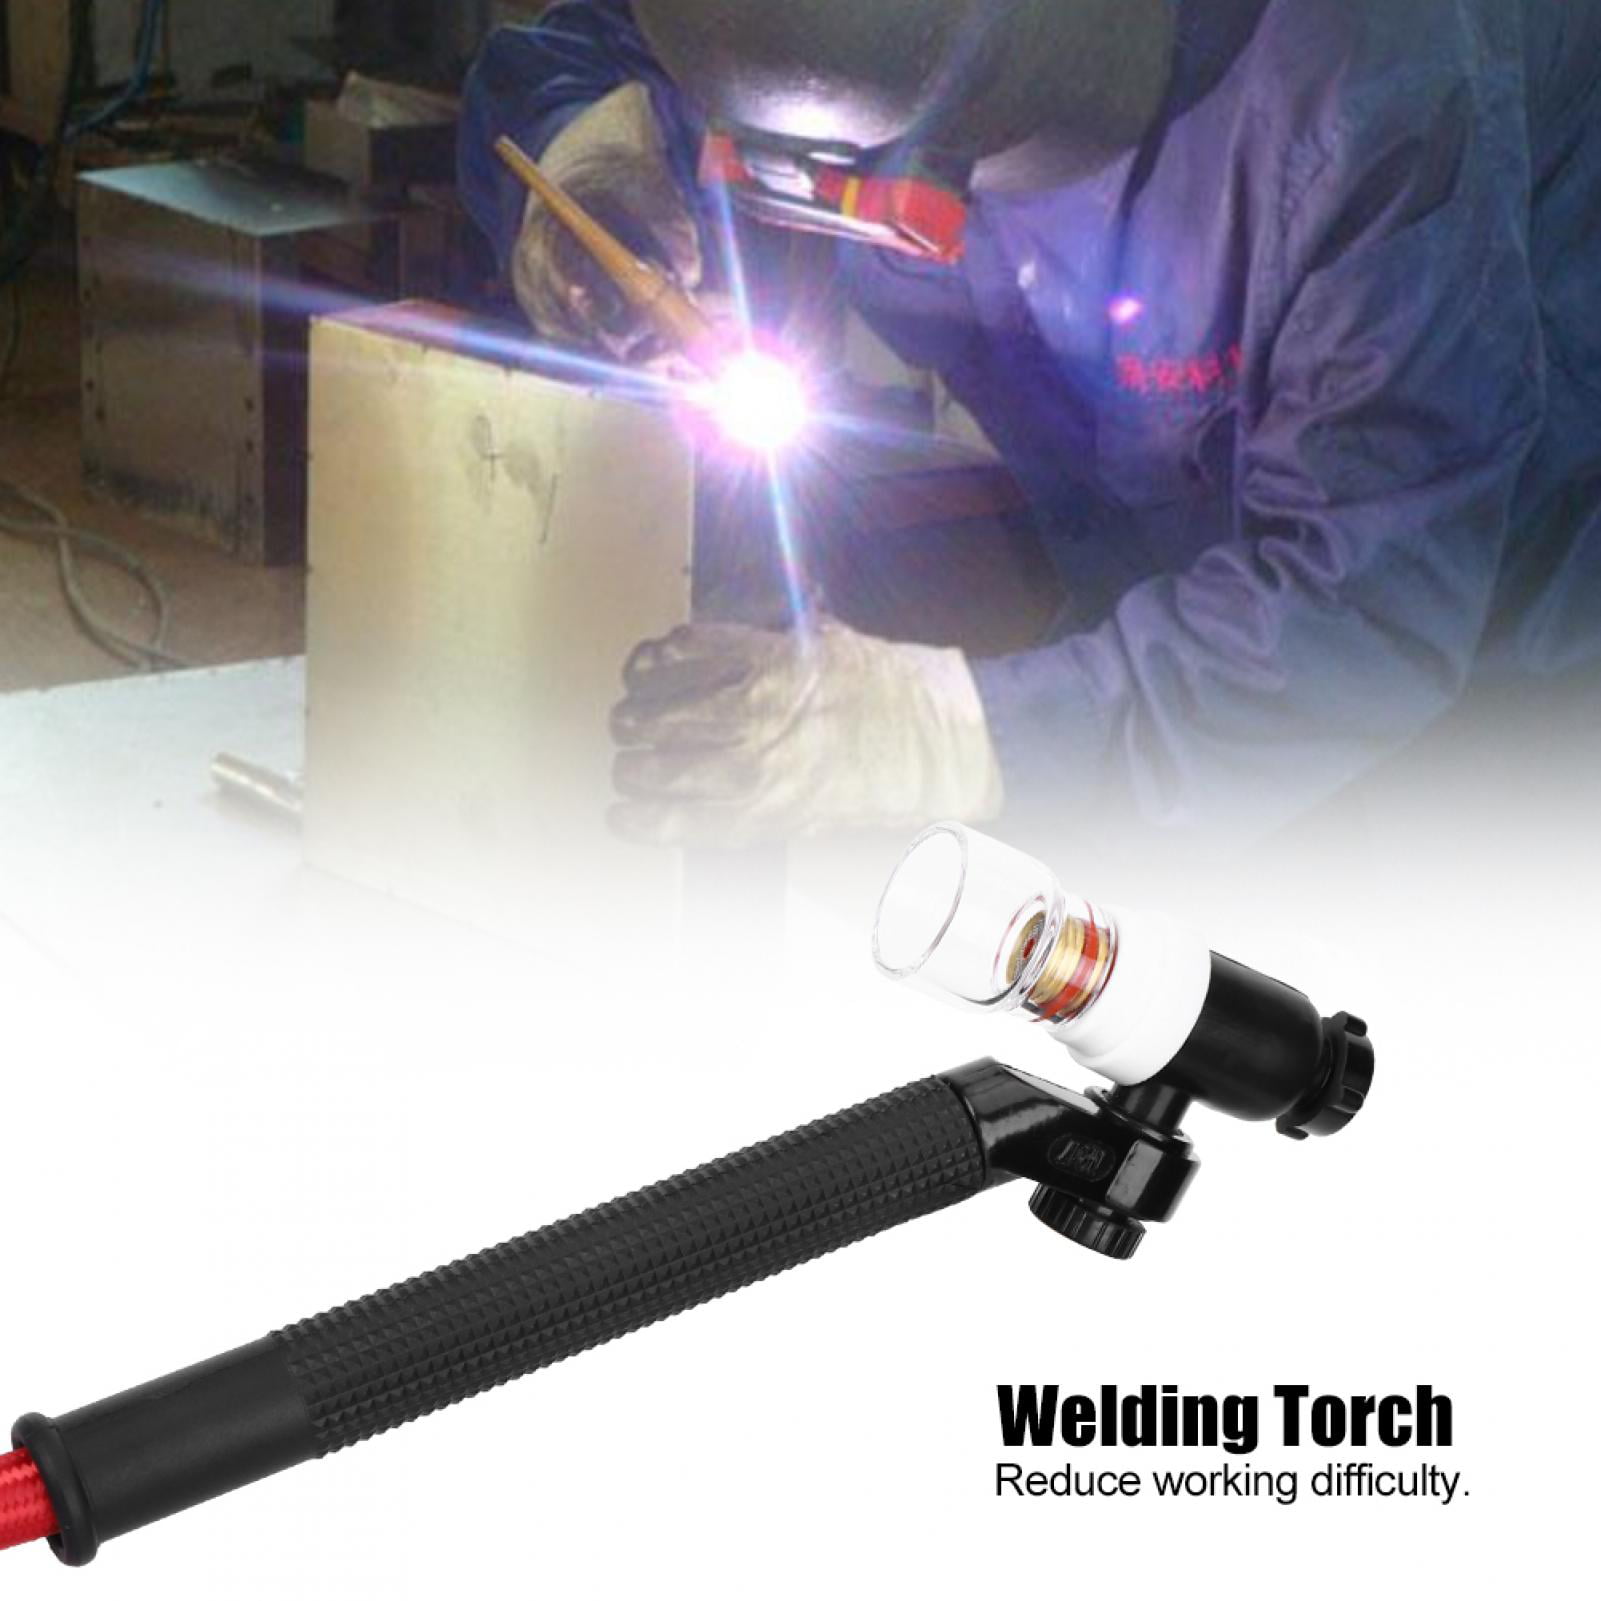 Welding Torch Wear-Resistant Soldering Tool Durable Reduce The Difficulty Of Work for Labor-Saving A Variety Of Welding Environments Welding Easier